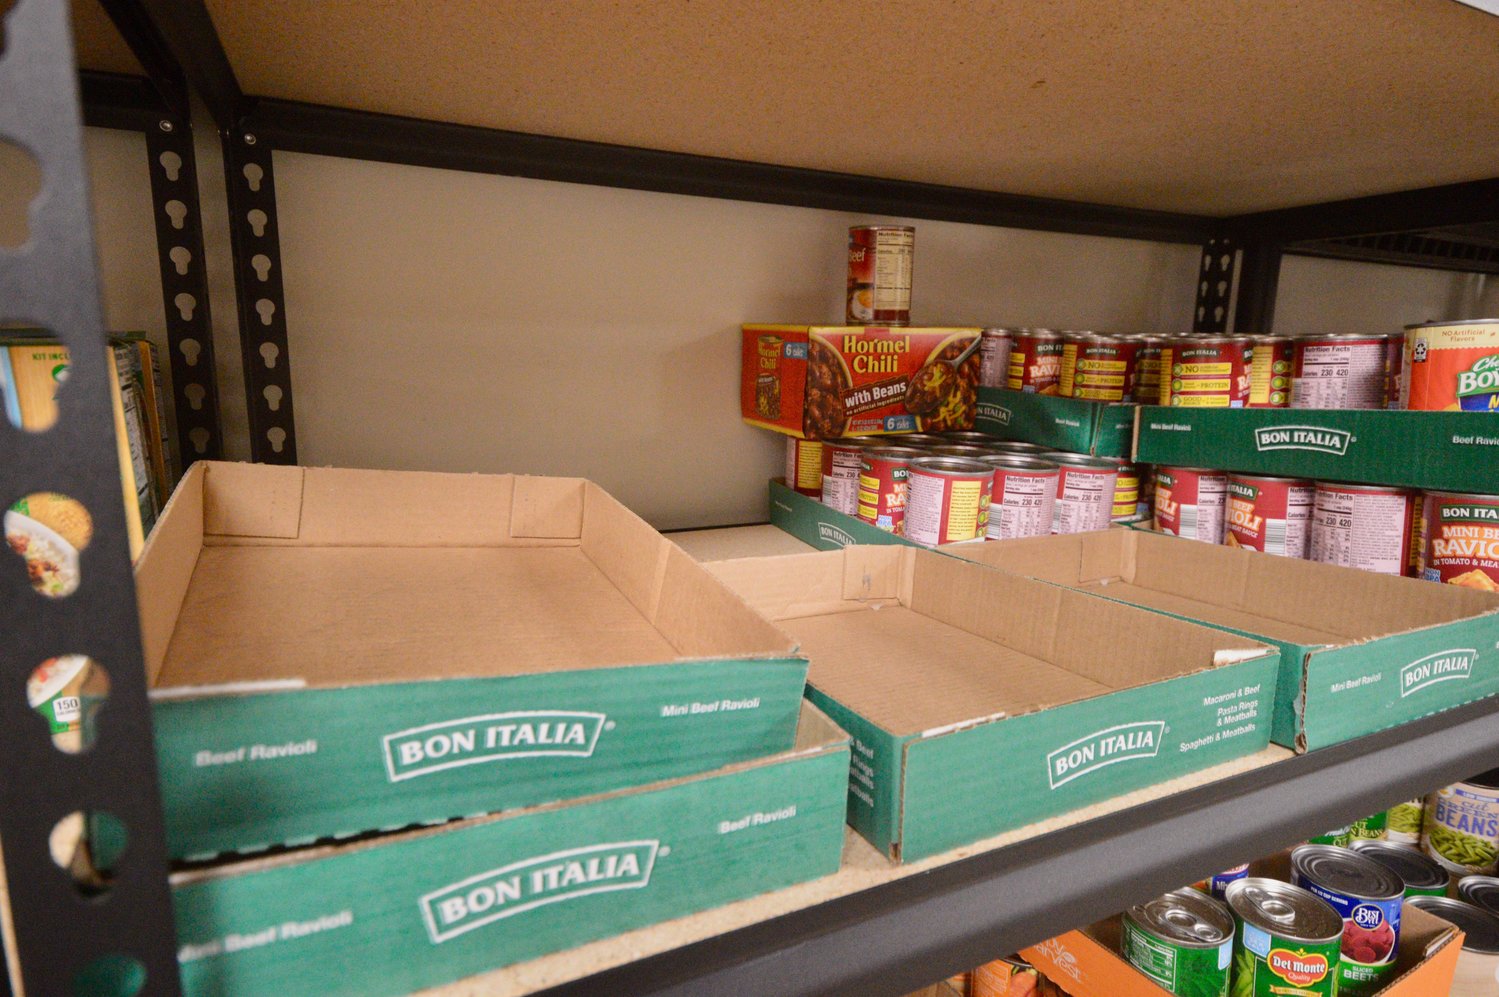 Times are tough at the St. John’s Lodge Food Pantry, which is having trouble keeping up with demand from local families in need.